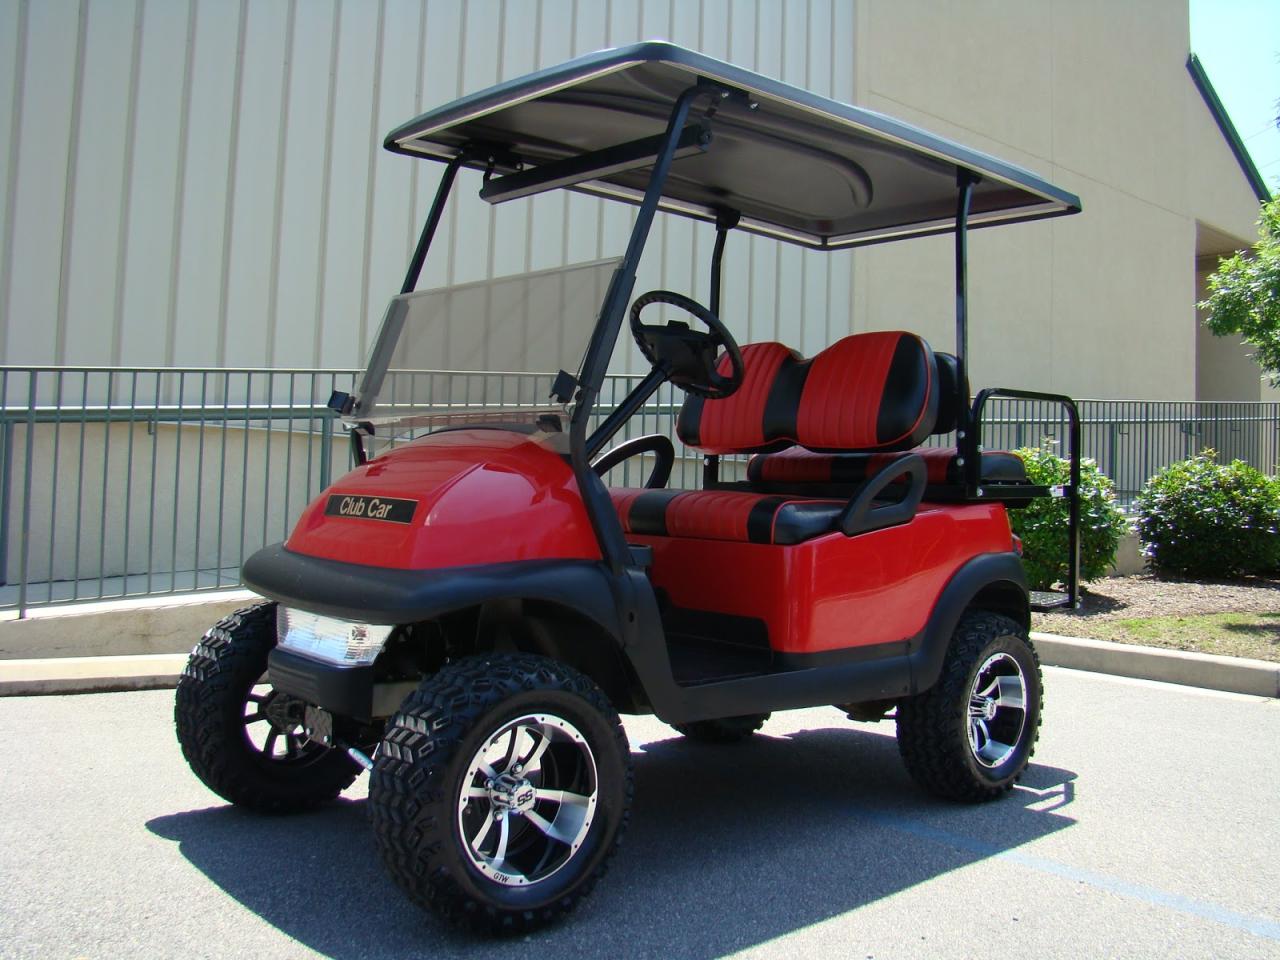 Used Golf Carts for Sale by Owner in Fulton, New York: Your Ultimate Guide to Buying and Selling